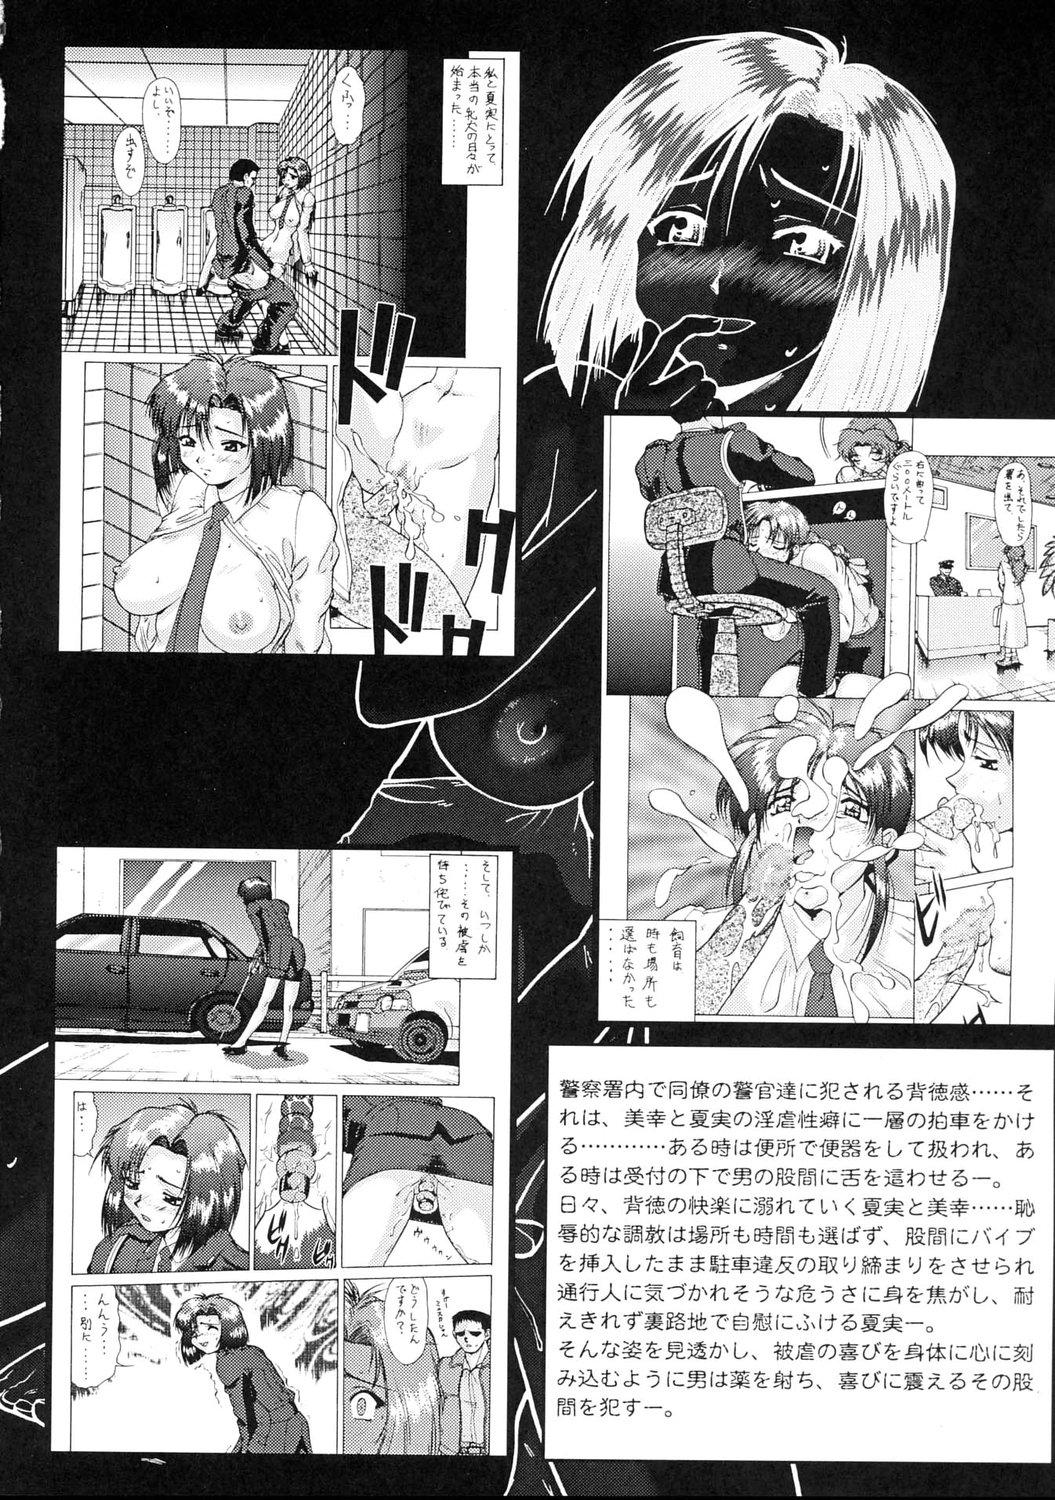 French Porn Taiho Shichauzo The Doujin Vol. 5 - Youre under arrest Pornstar - Page 9